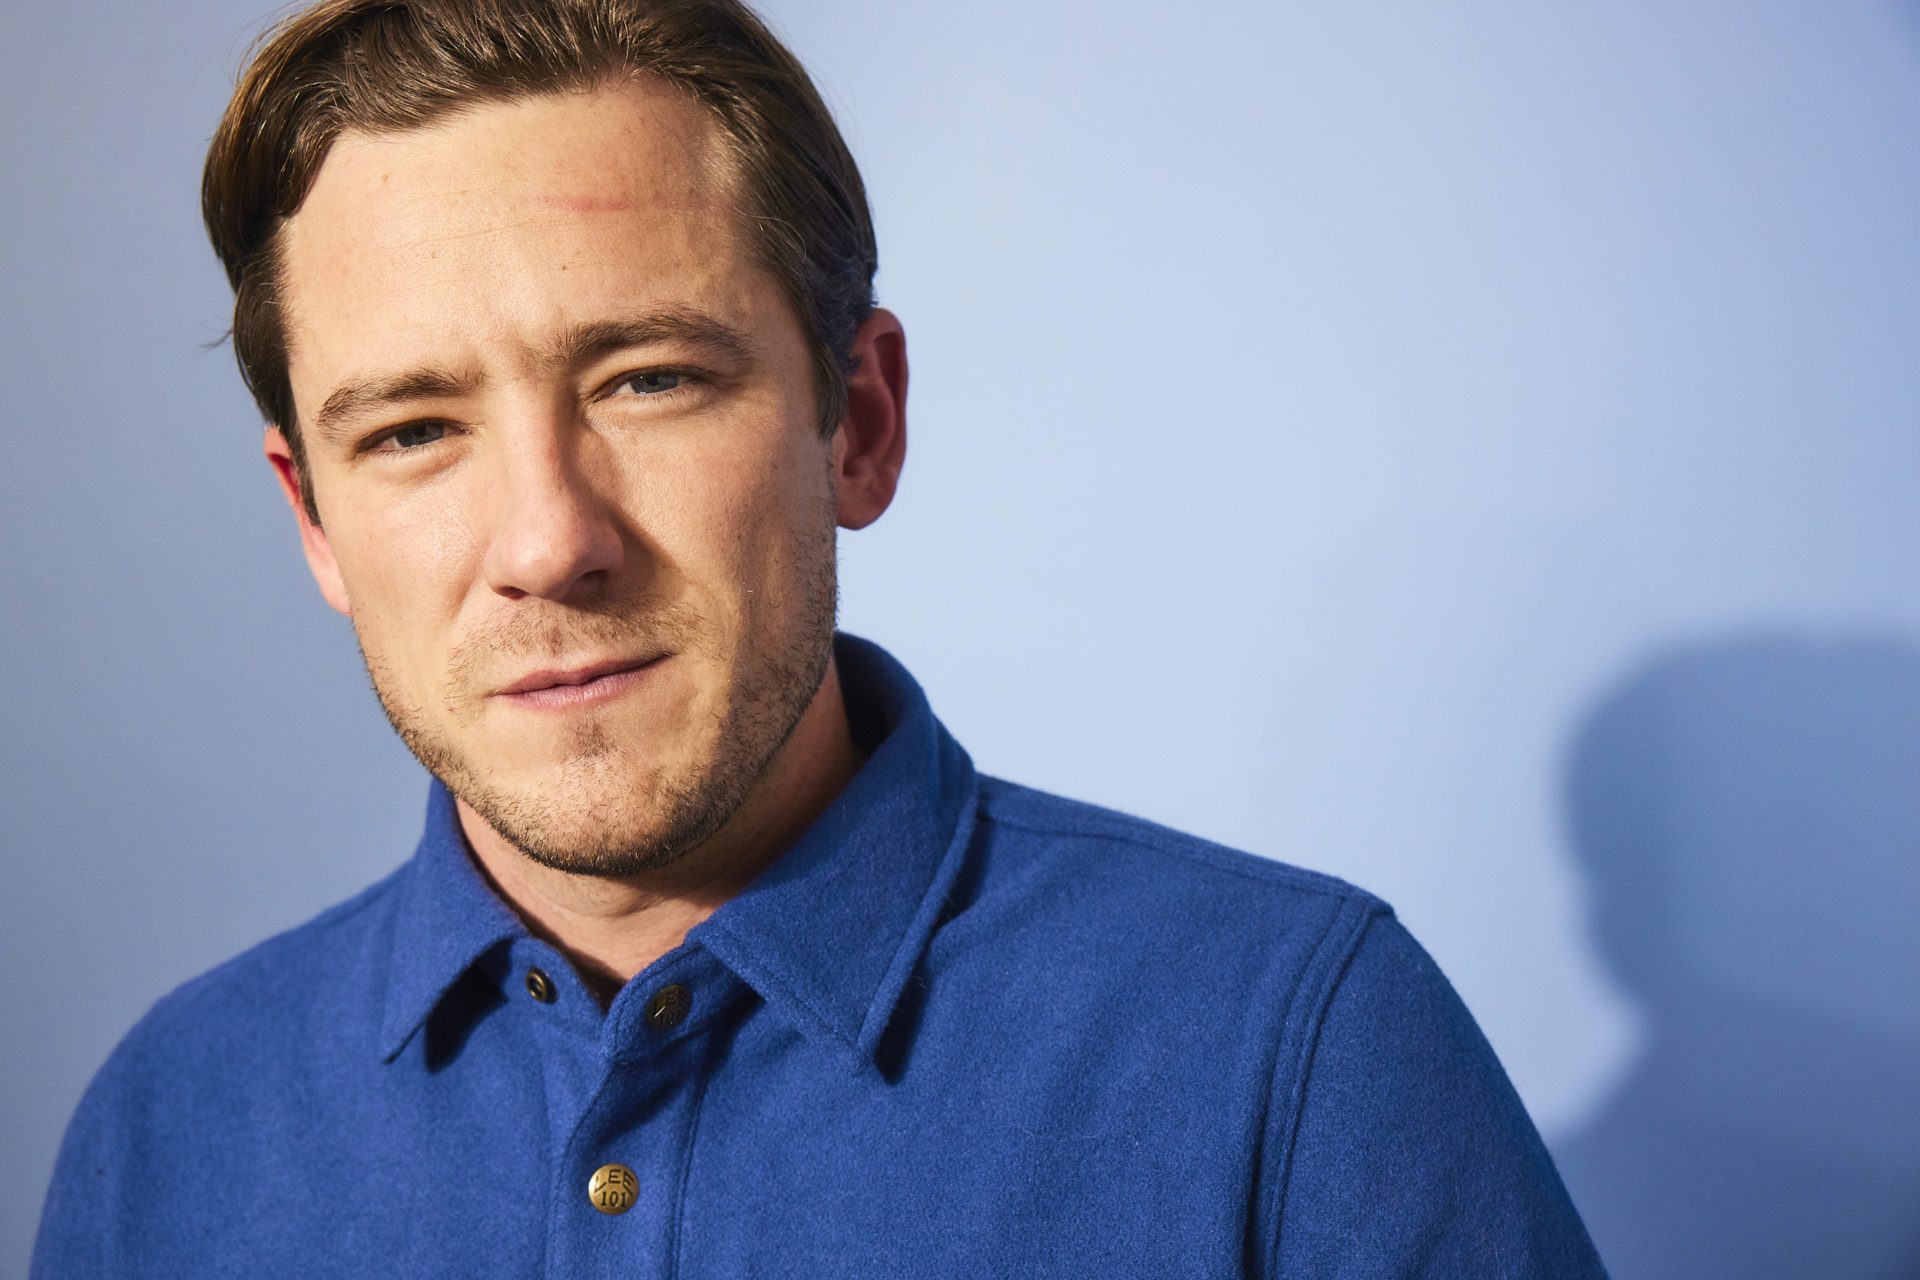 Who is Lewis Pullman?